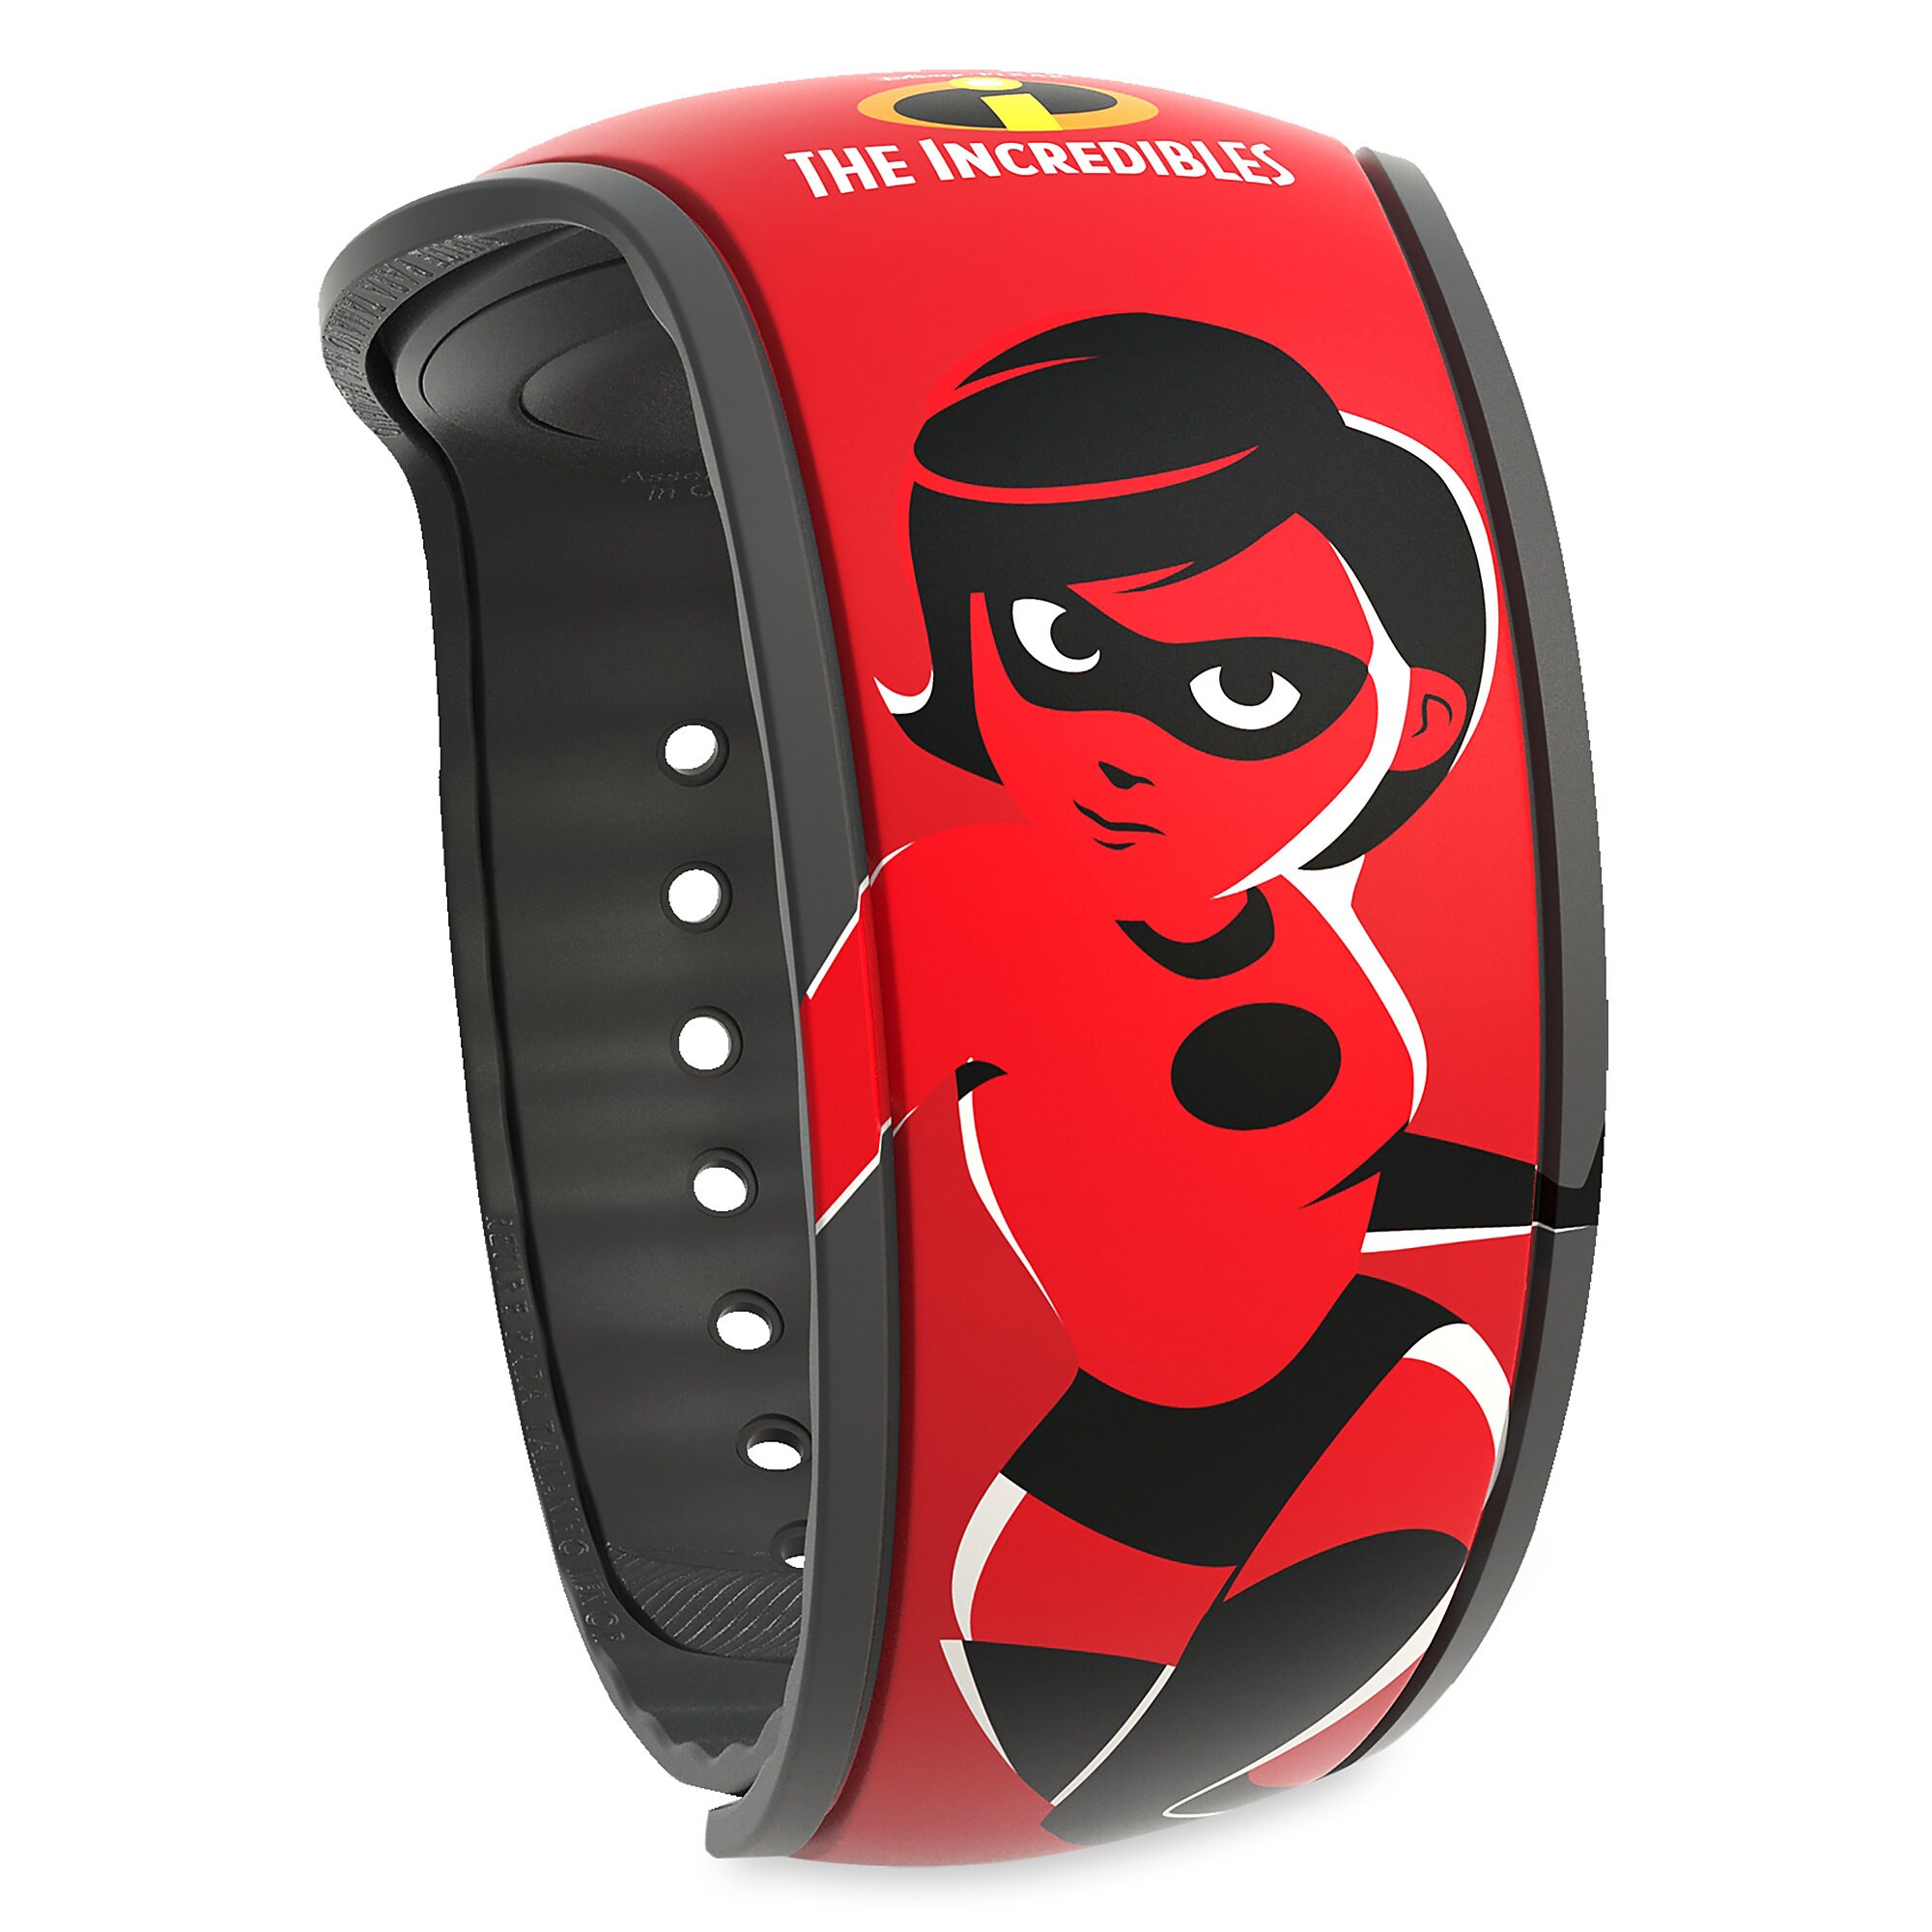 Mrs. Incredible MagicBand 2 - The Incredibles